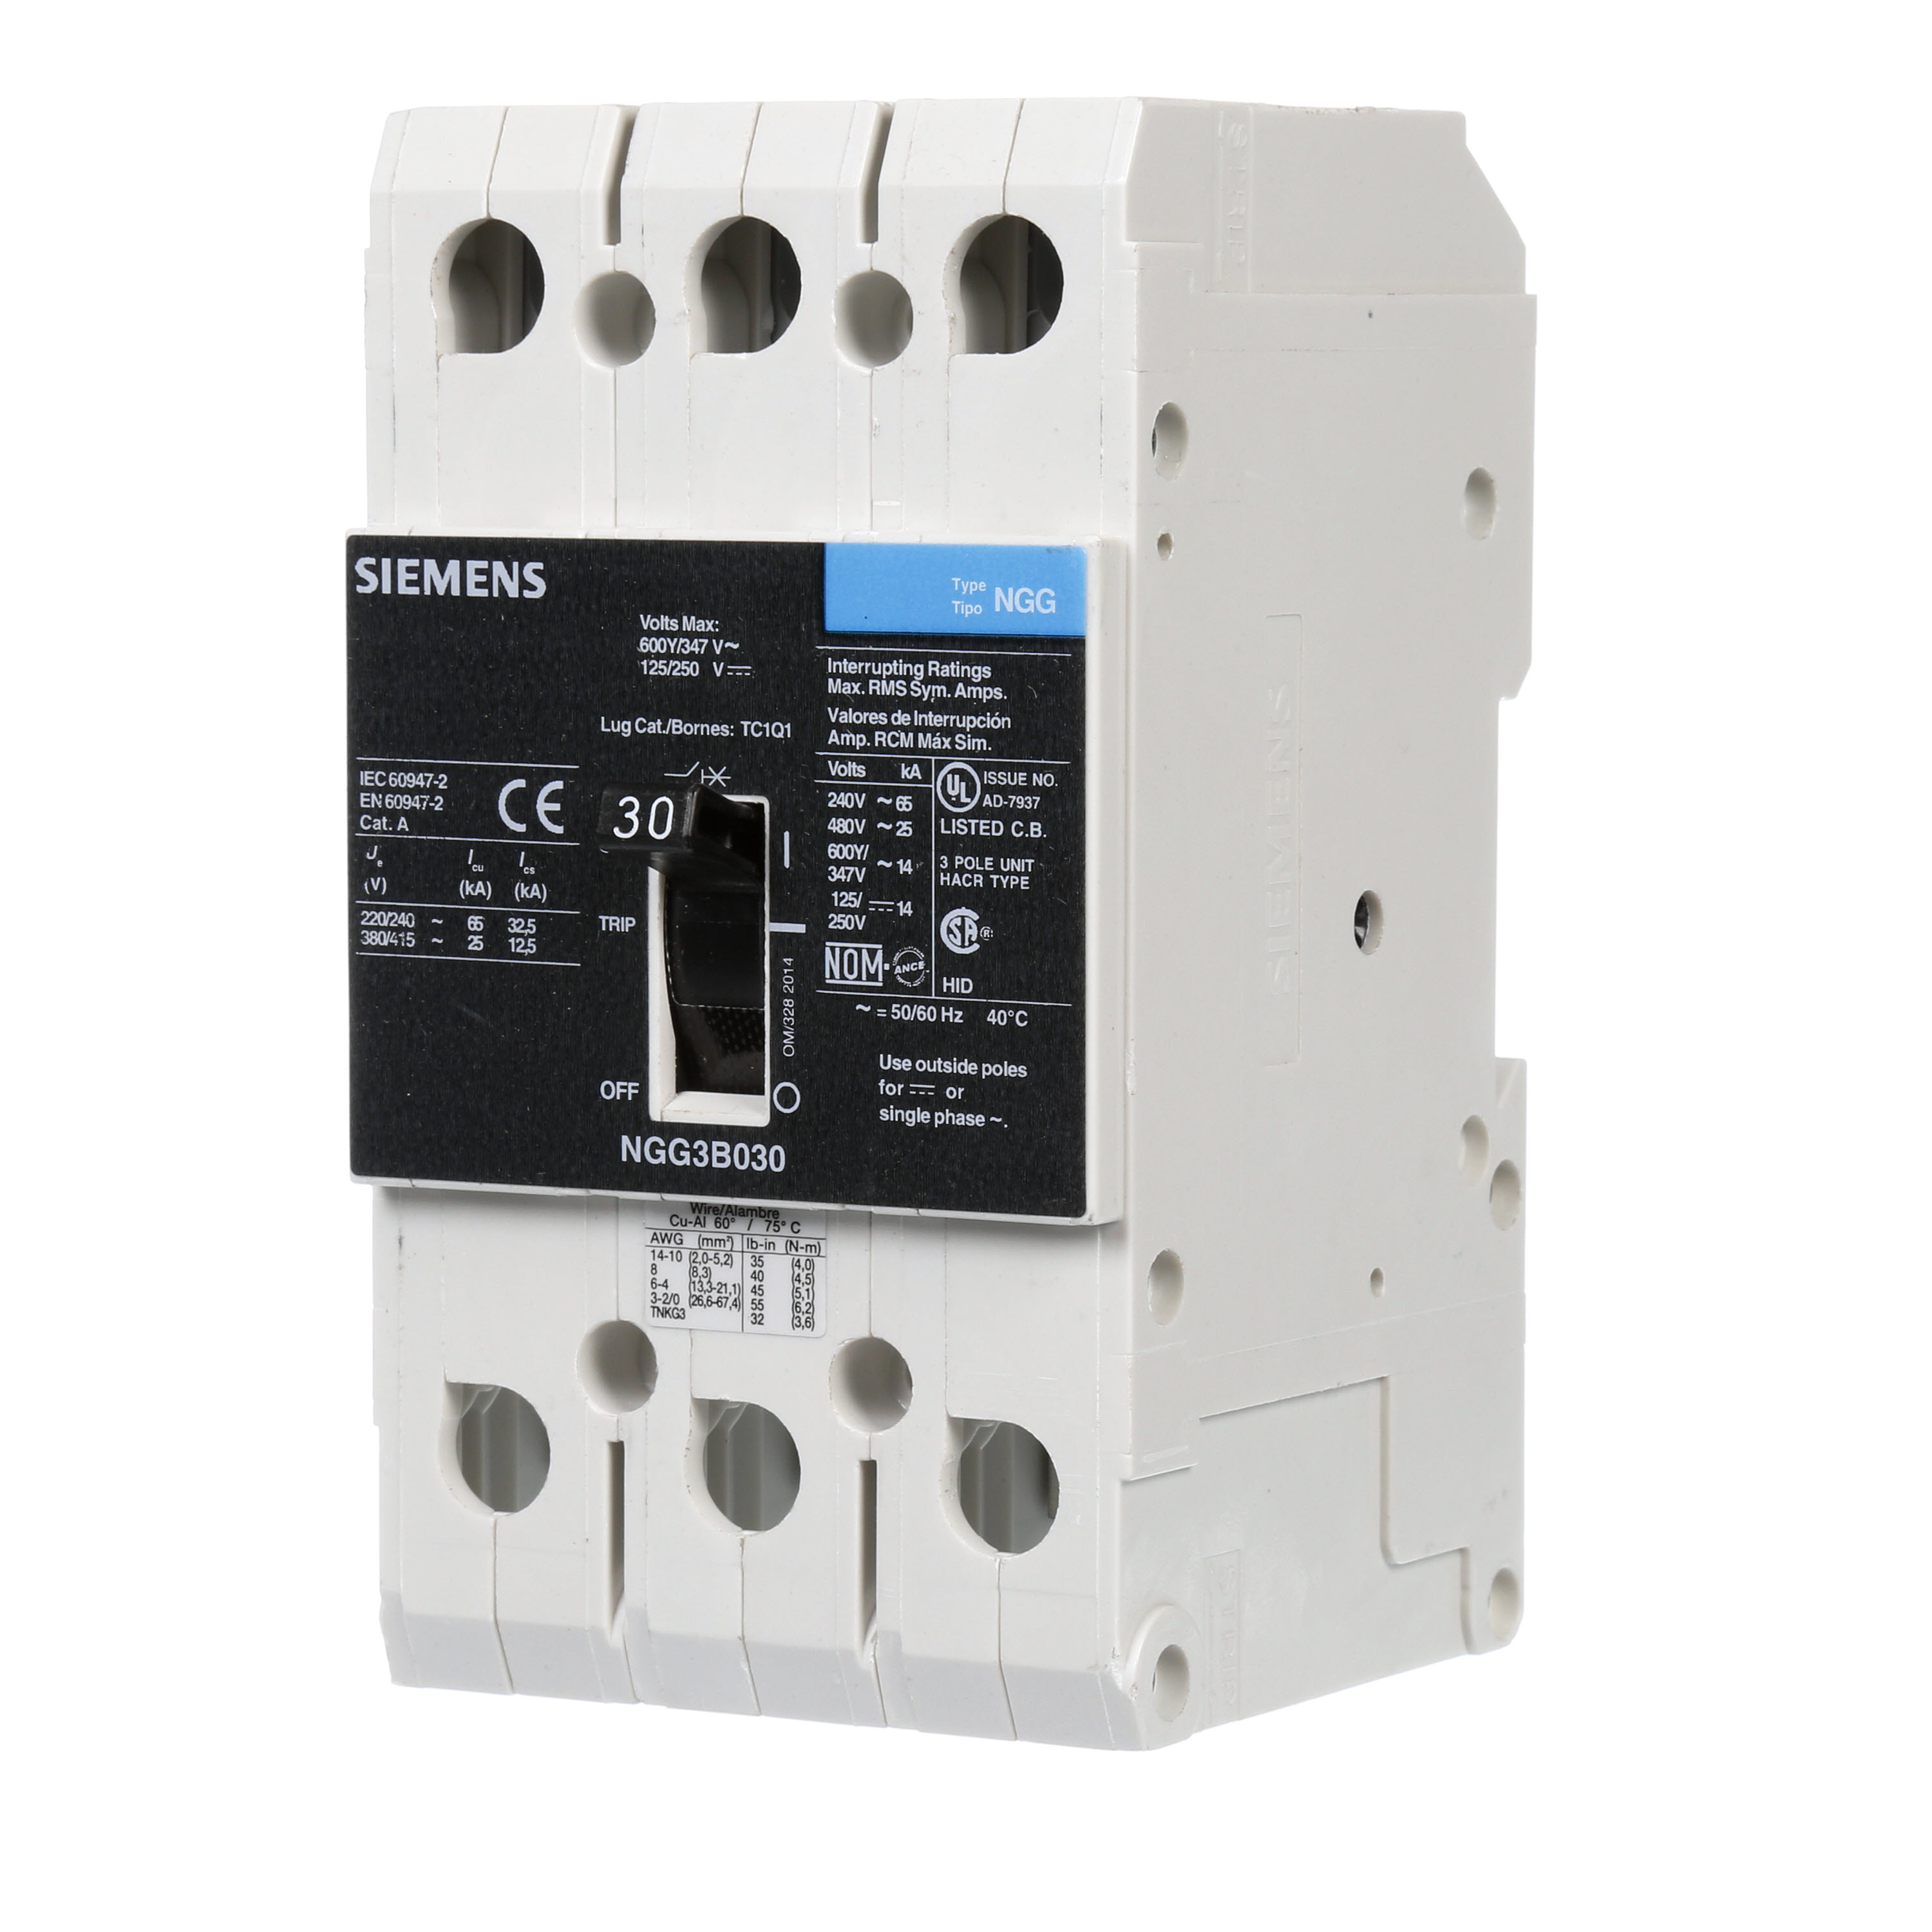 SIEMENS LOW VOLTAGE G FRAME CIRCUIT BREAKER WITH THERMAL - MAGNETIC TRIP. UL LISTED NGG FRAME WITH STANDARD BREAKING CAPACITY. 30A 3-POLE (14KAIC AT 600Y/347V)(25KAIC AT 480V). SPECIAL FEATURES MOUNTS ON DIN RAIL / SCREW, LINE AND LOAD SIDE LUGS (TC1Q1) WIRE RANGE 14 - 10 AWS (CU/AL). DIMENSIONS (W x H x D) IN 3 x 5.4 x 2.8.